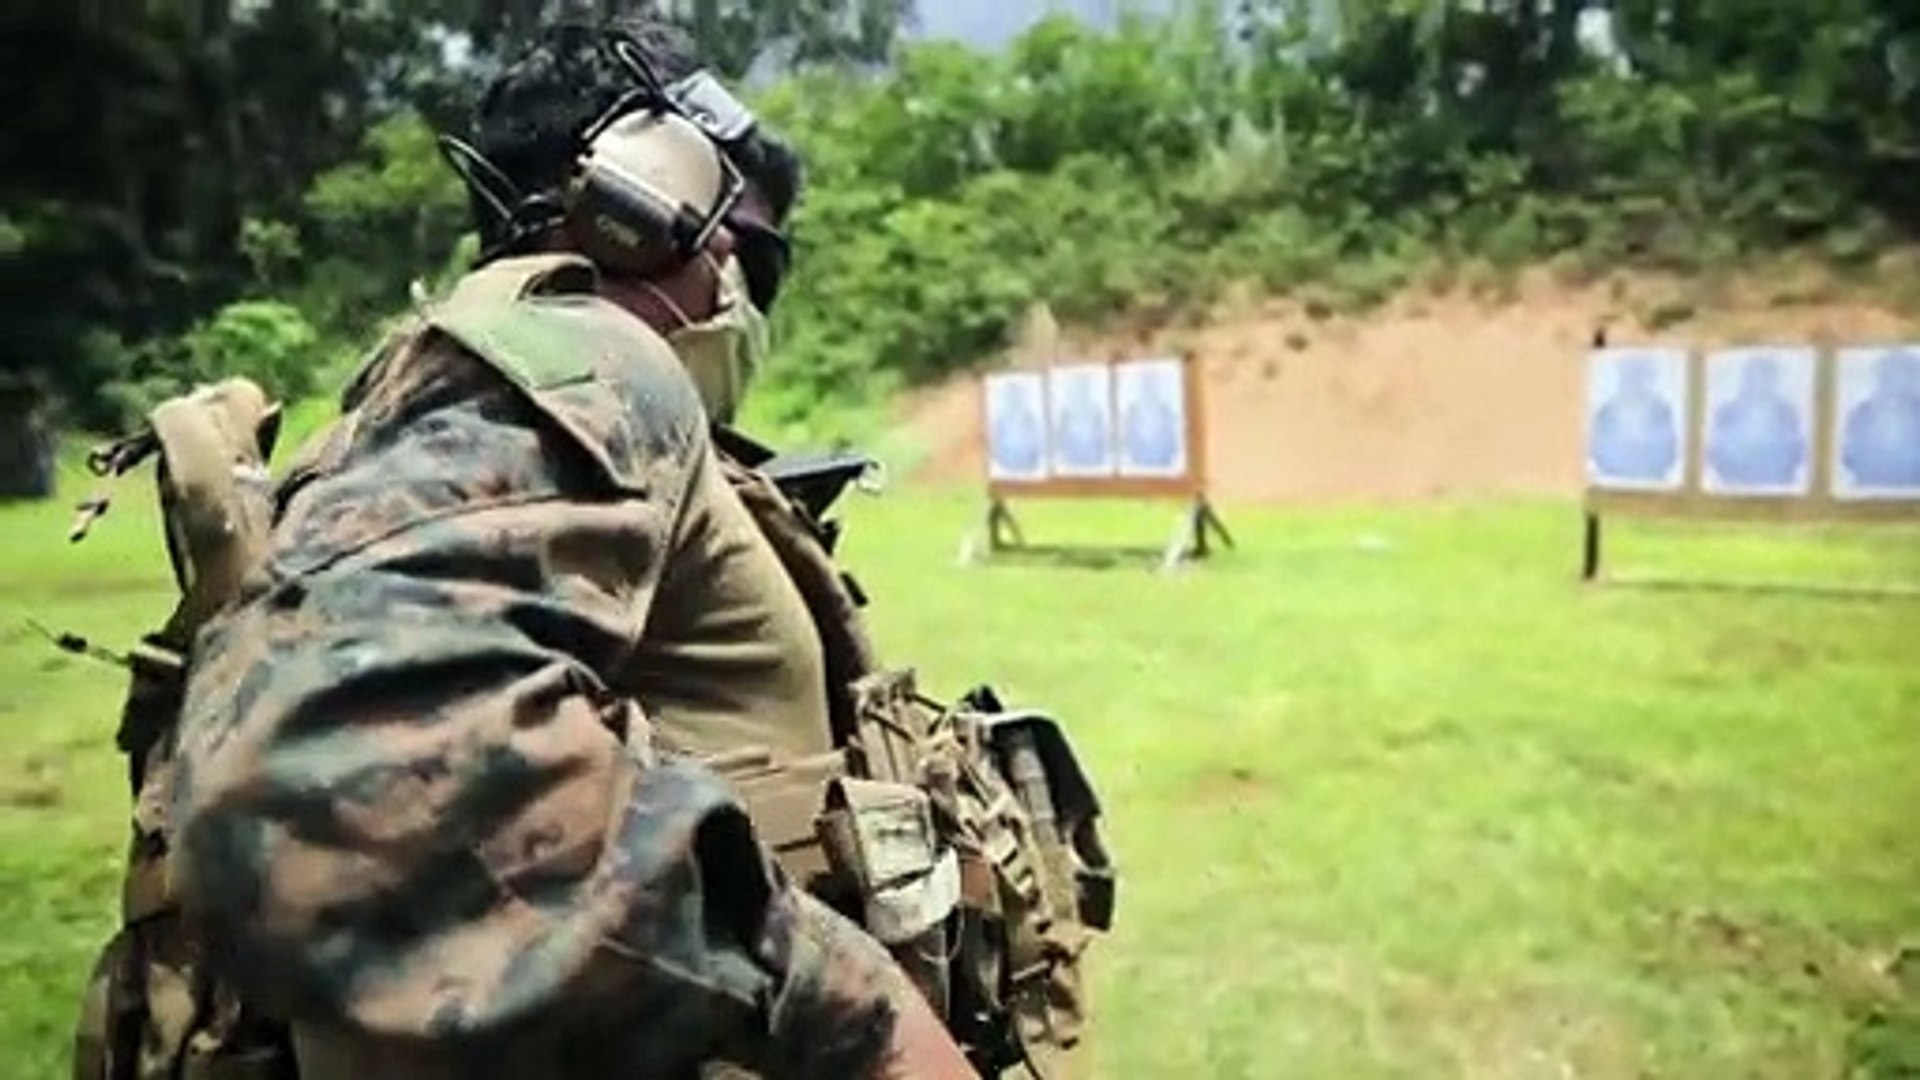 U.S. Marines • Live Fire Training Exercise • Naval Base, Guam on August 12, 2020